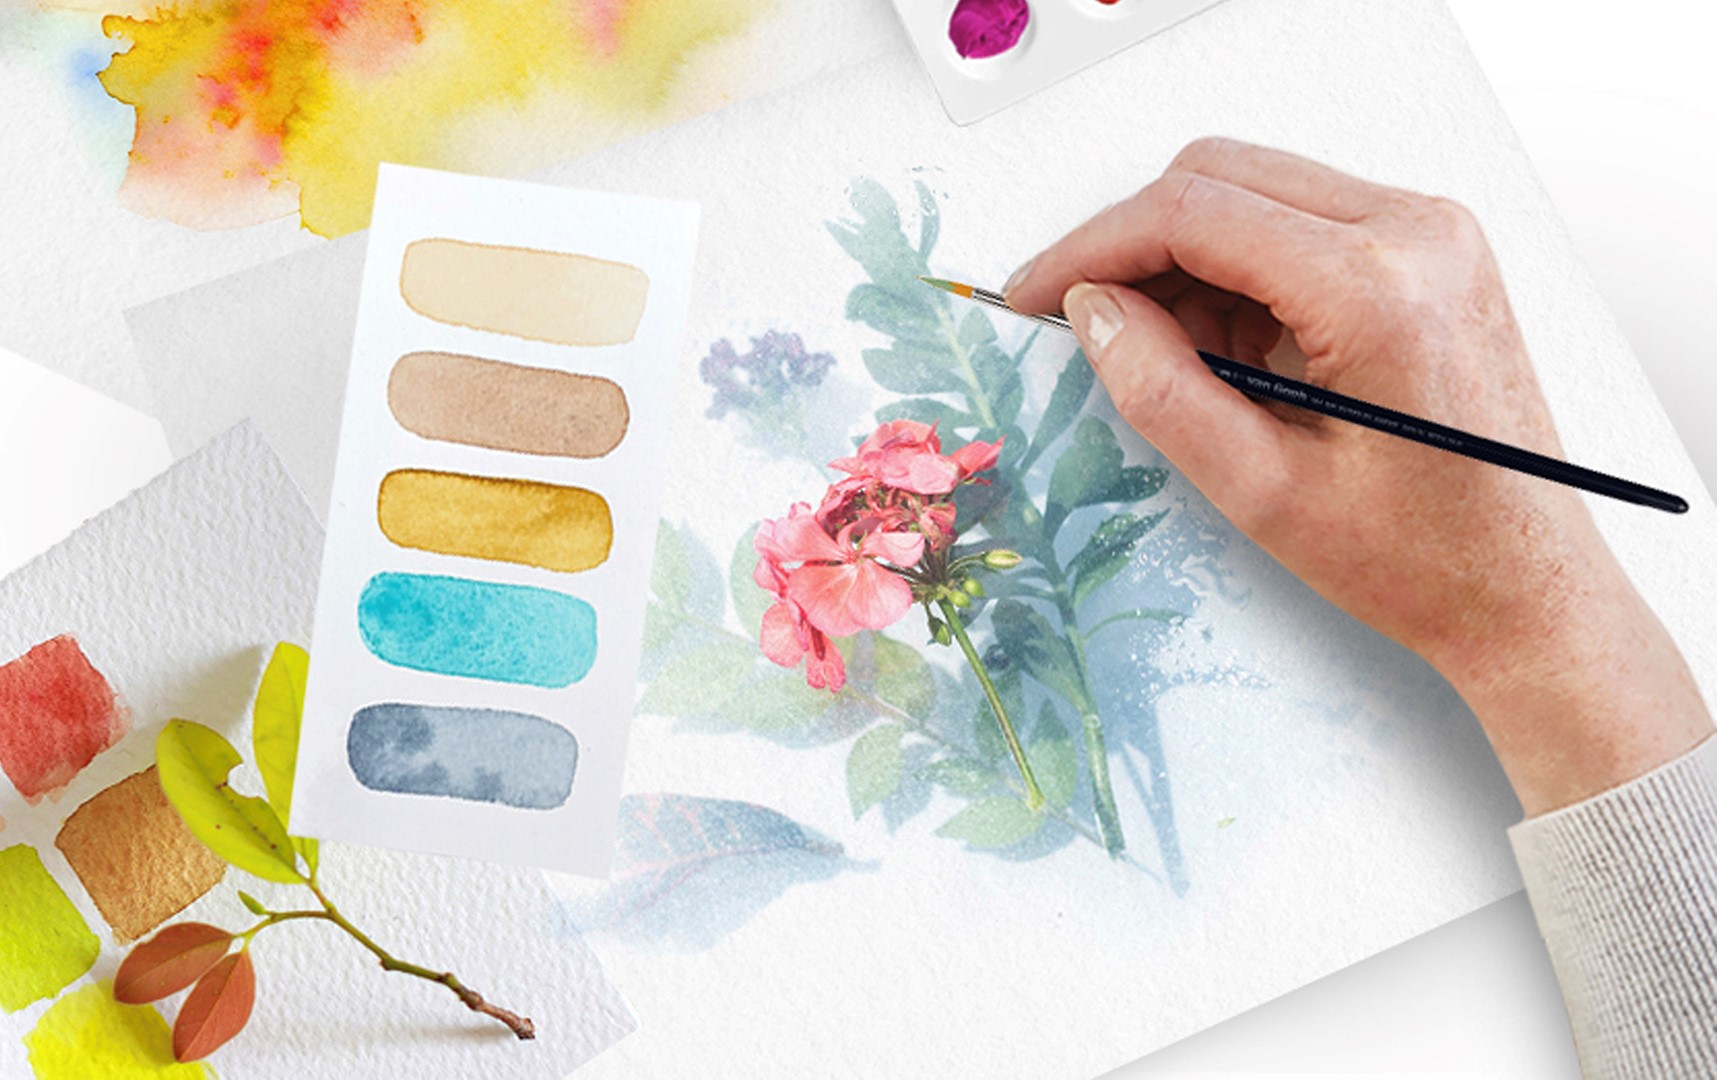 Artist painting a watercolour flower on her chosen art paper, surrounded by color swatches and other paper samples.